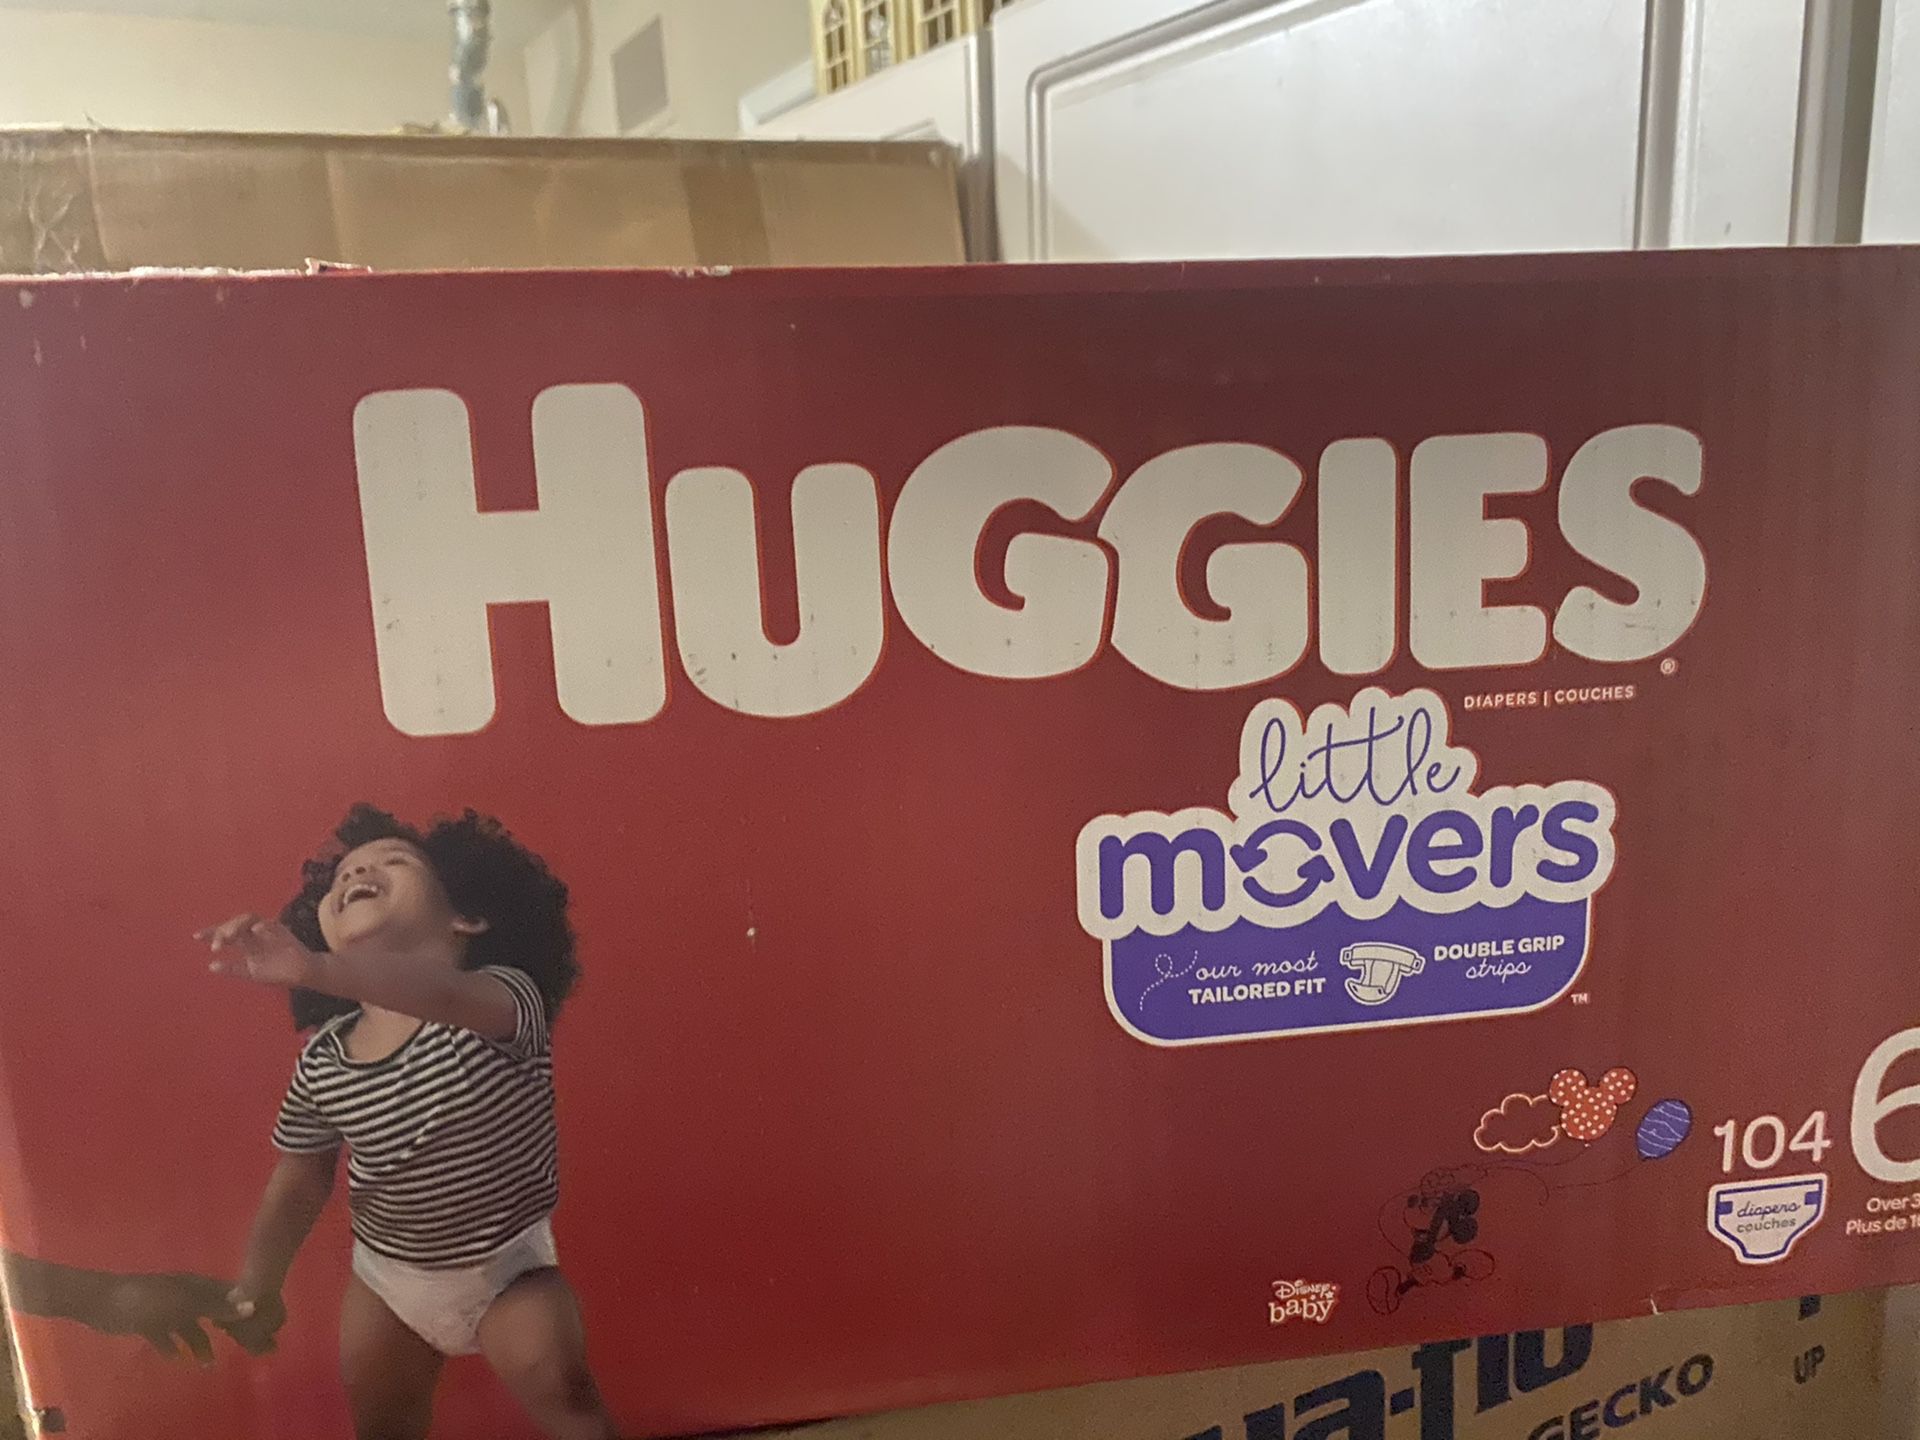 Huggies little movers size 6